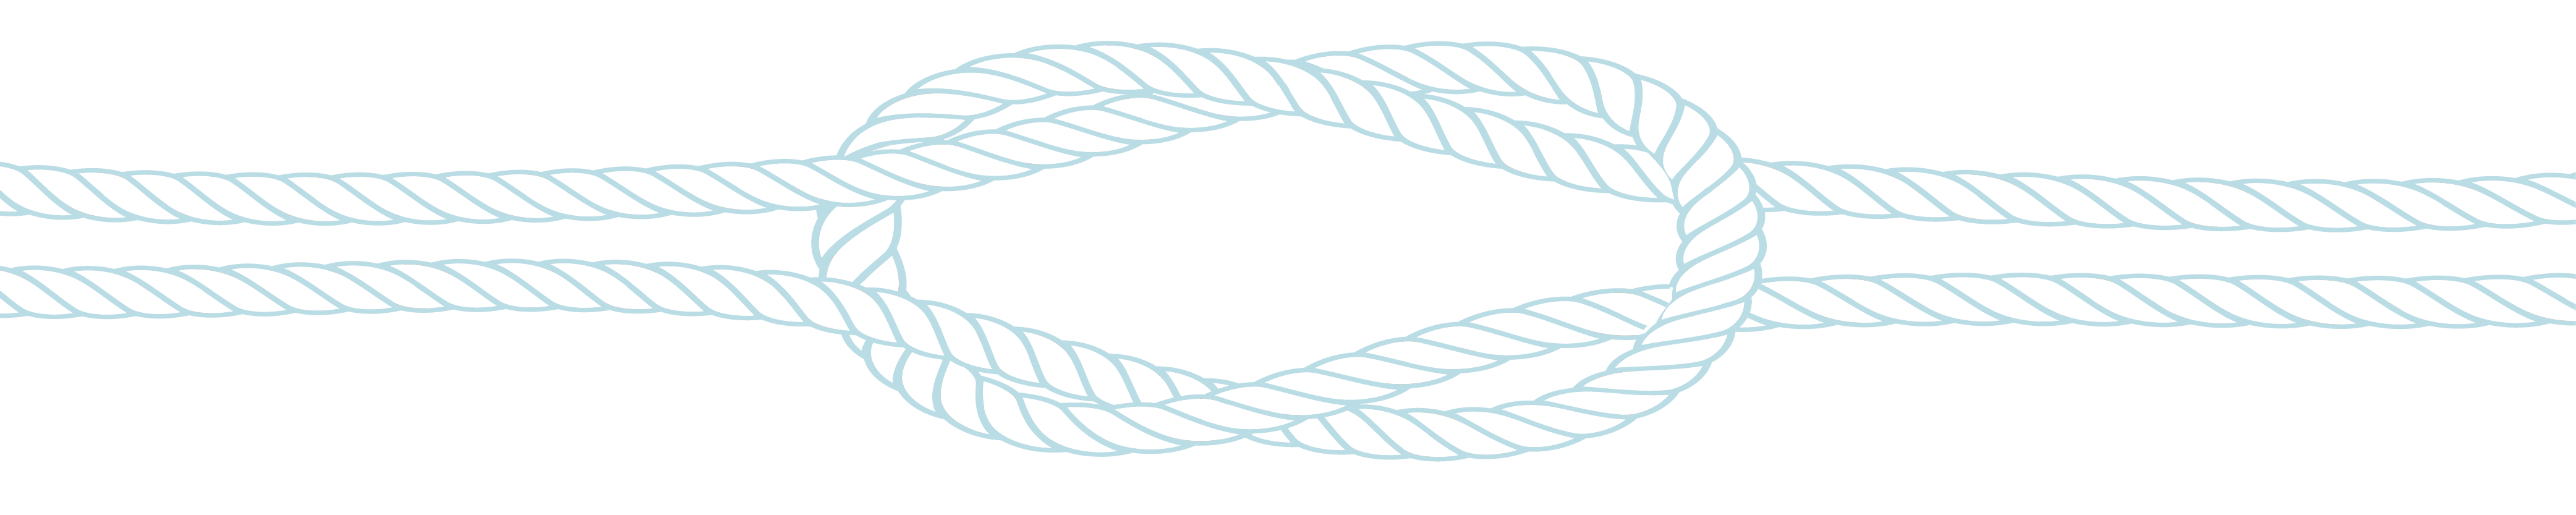 rope-01.png